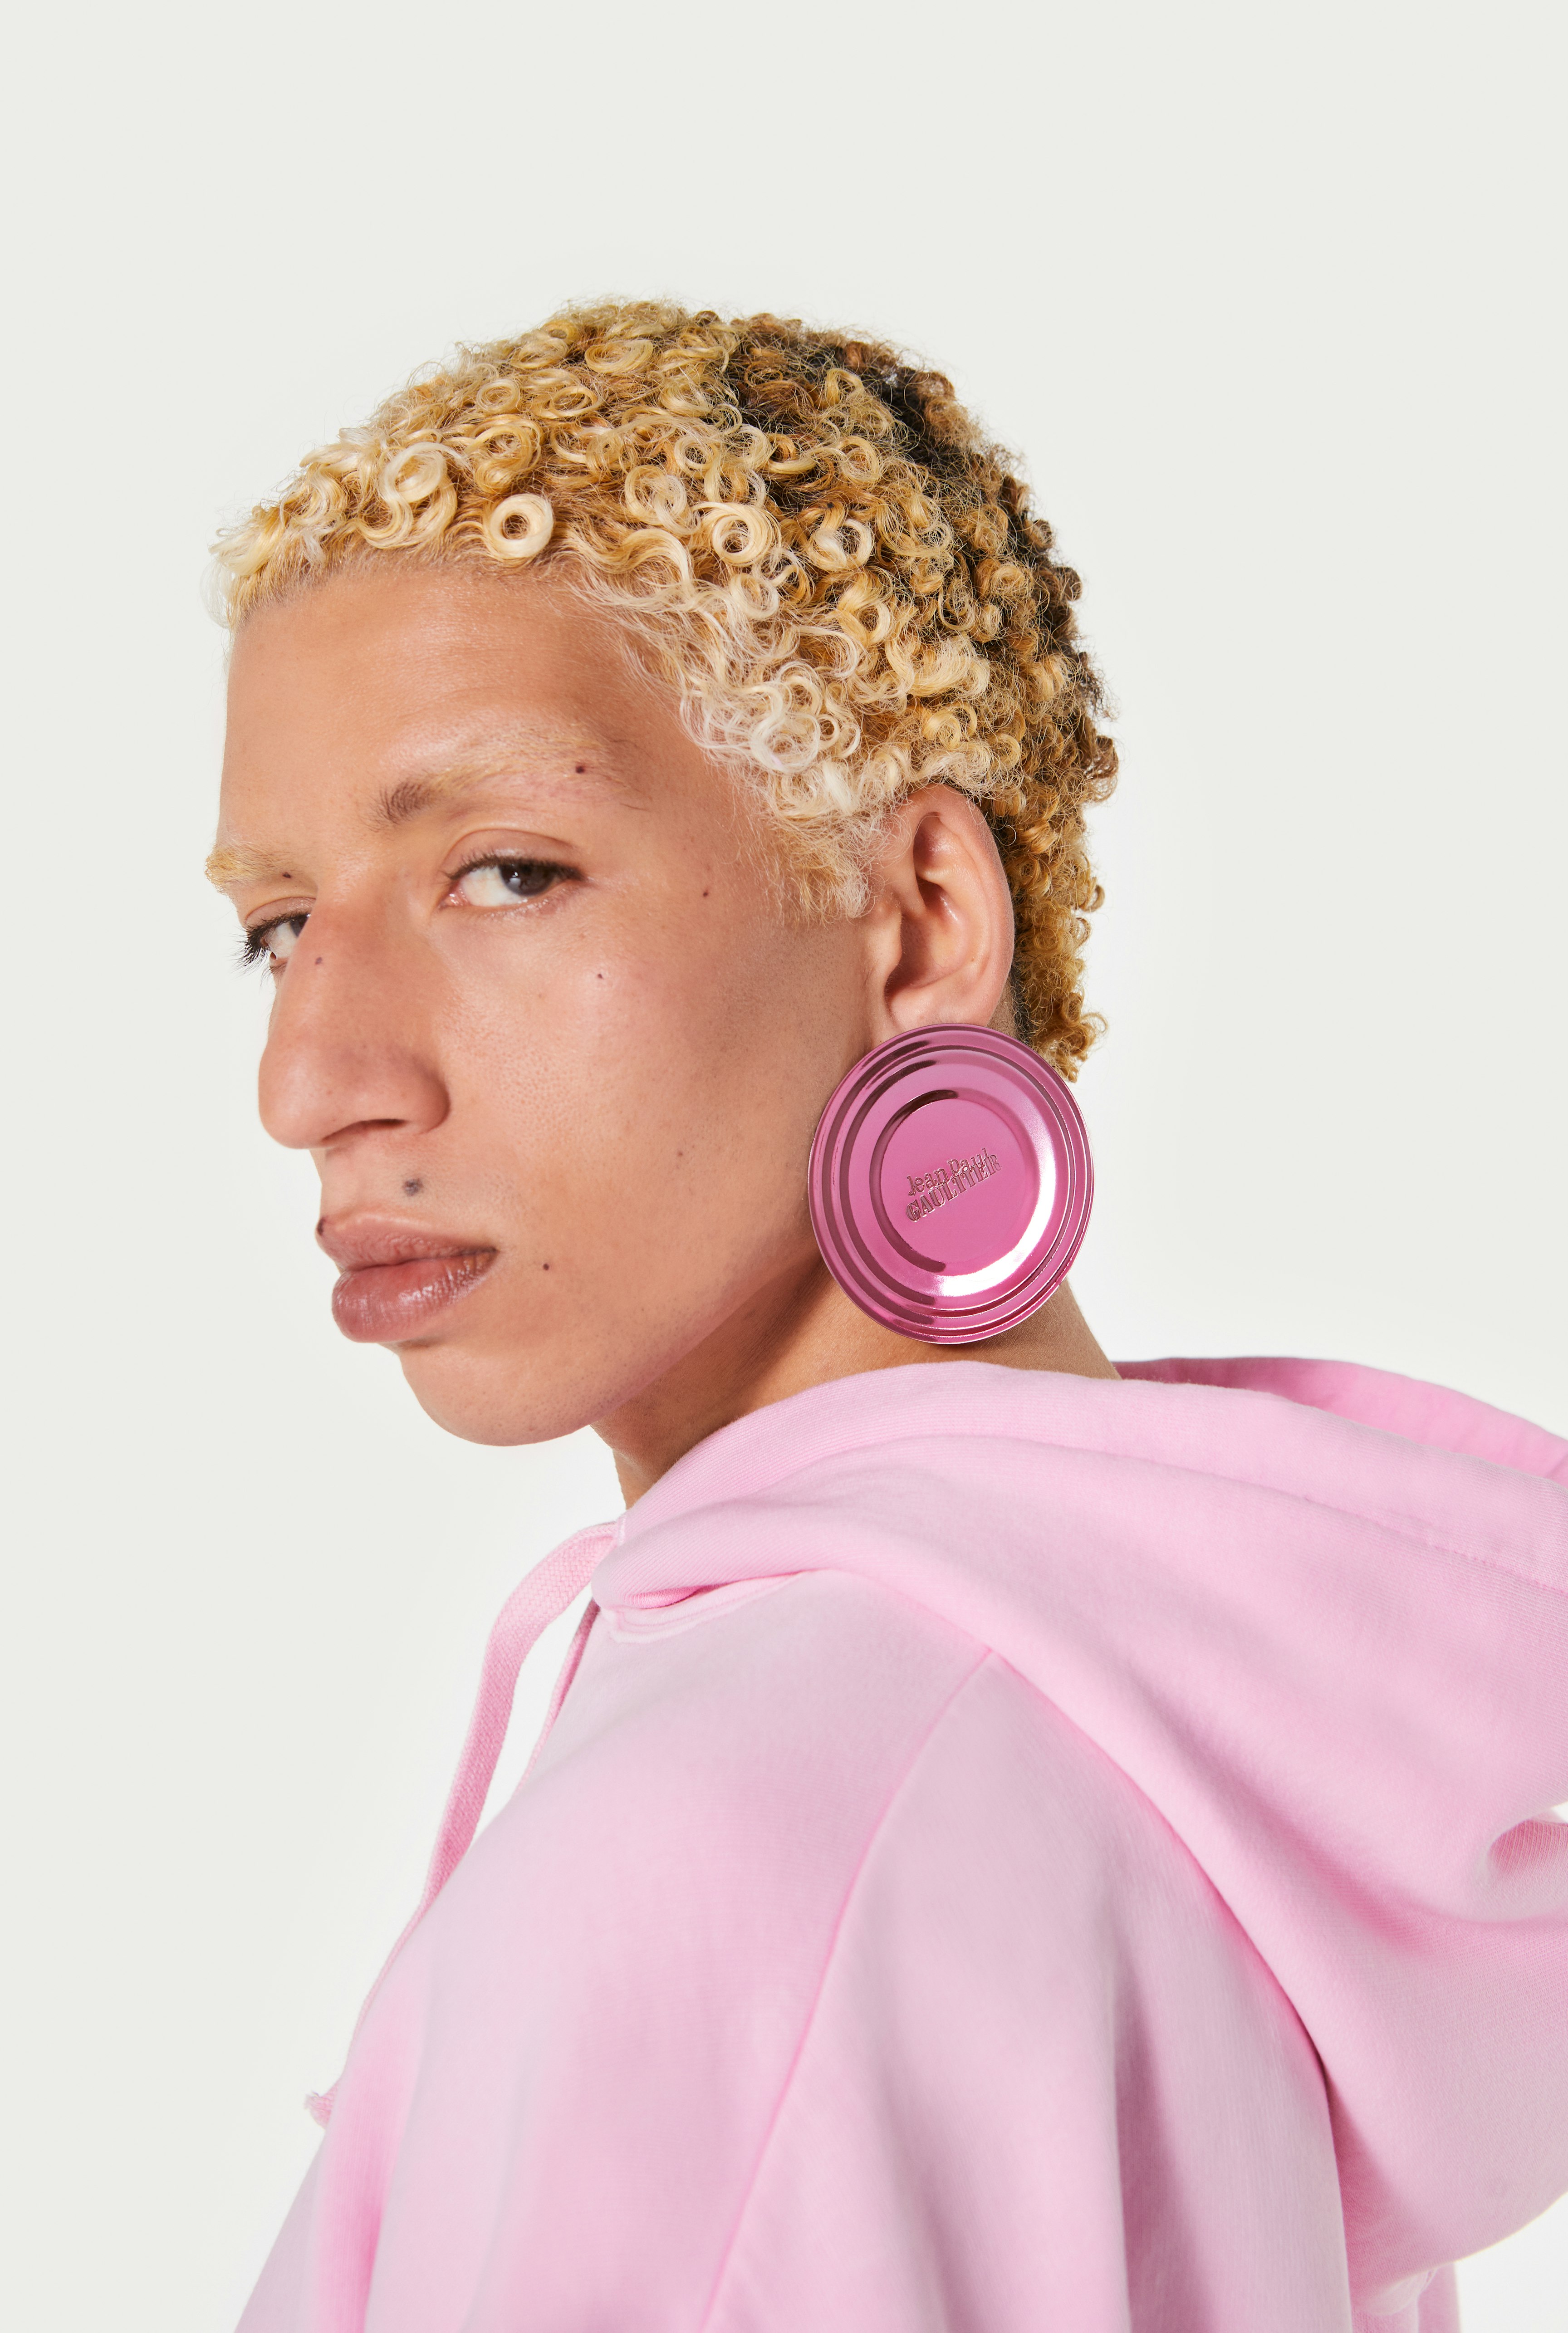 The Pink Tin Can Earrings Jean Paul Gaultier